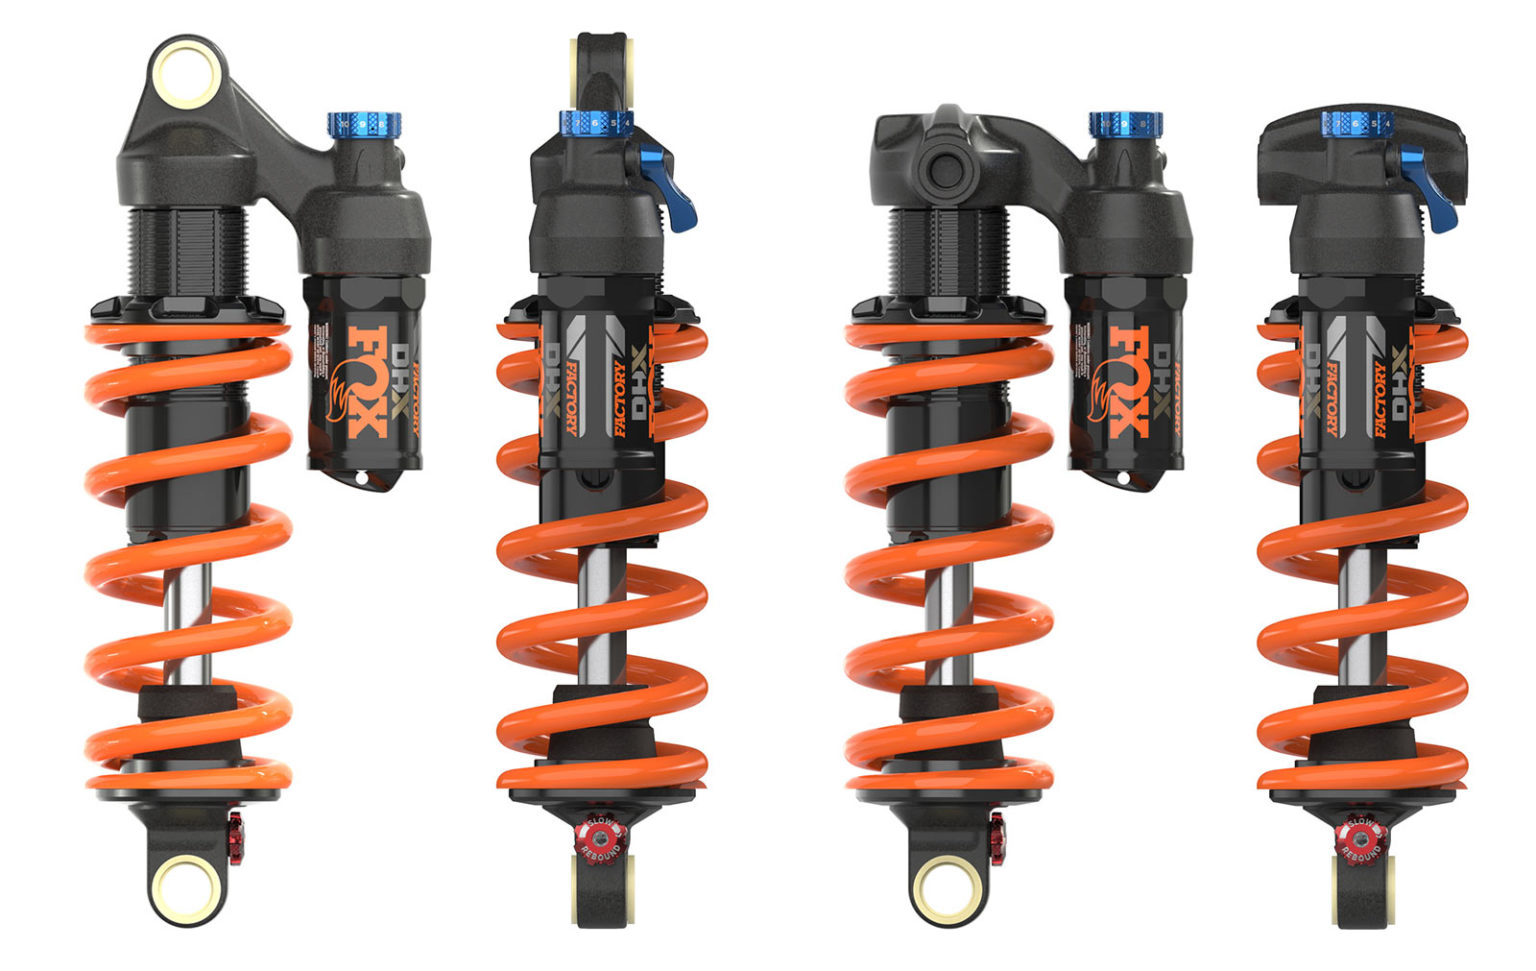 The FOX FLOAT X Air Shock and DHX Coil Shock are all-new for 2022 ...